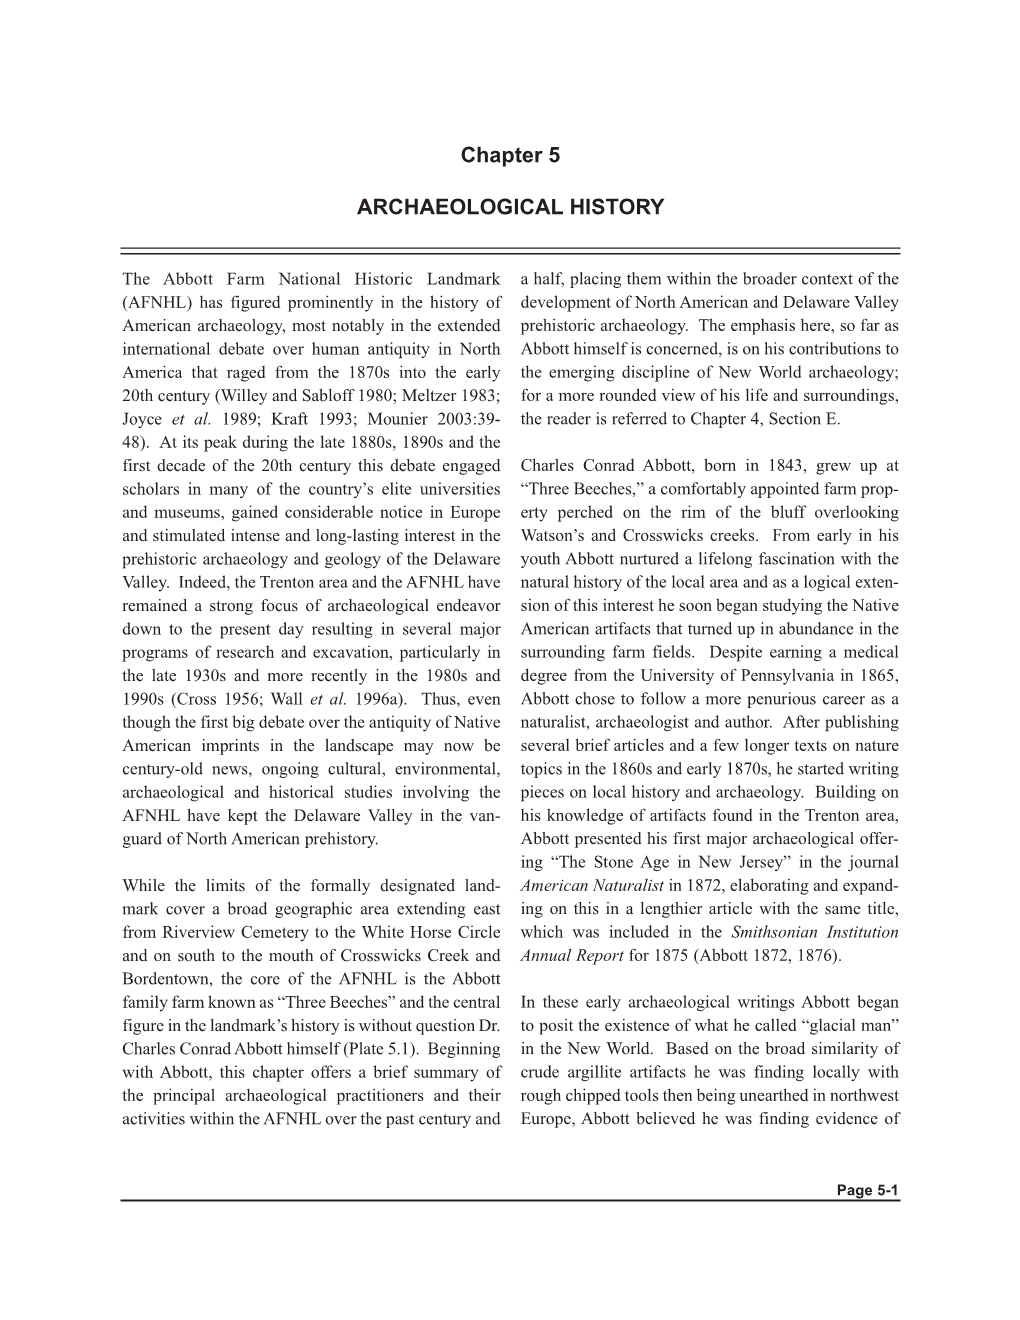 Chapter 1 INTRODUCTION Chapter 5 ARCHAEOLOGICAL HISTORY